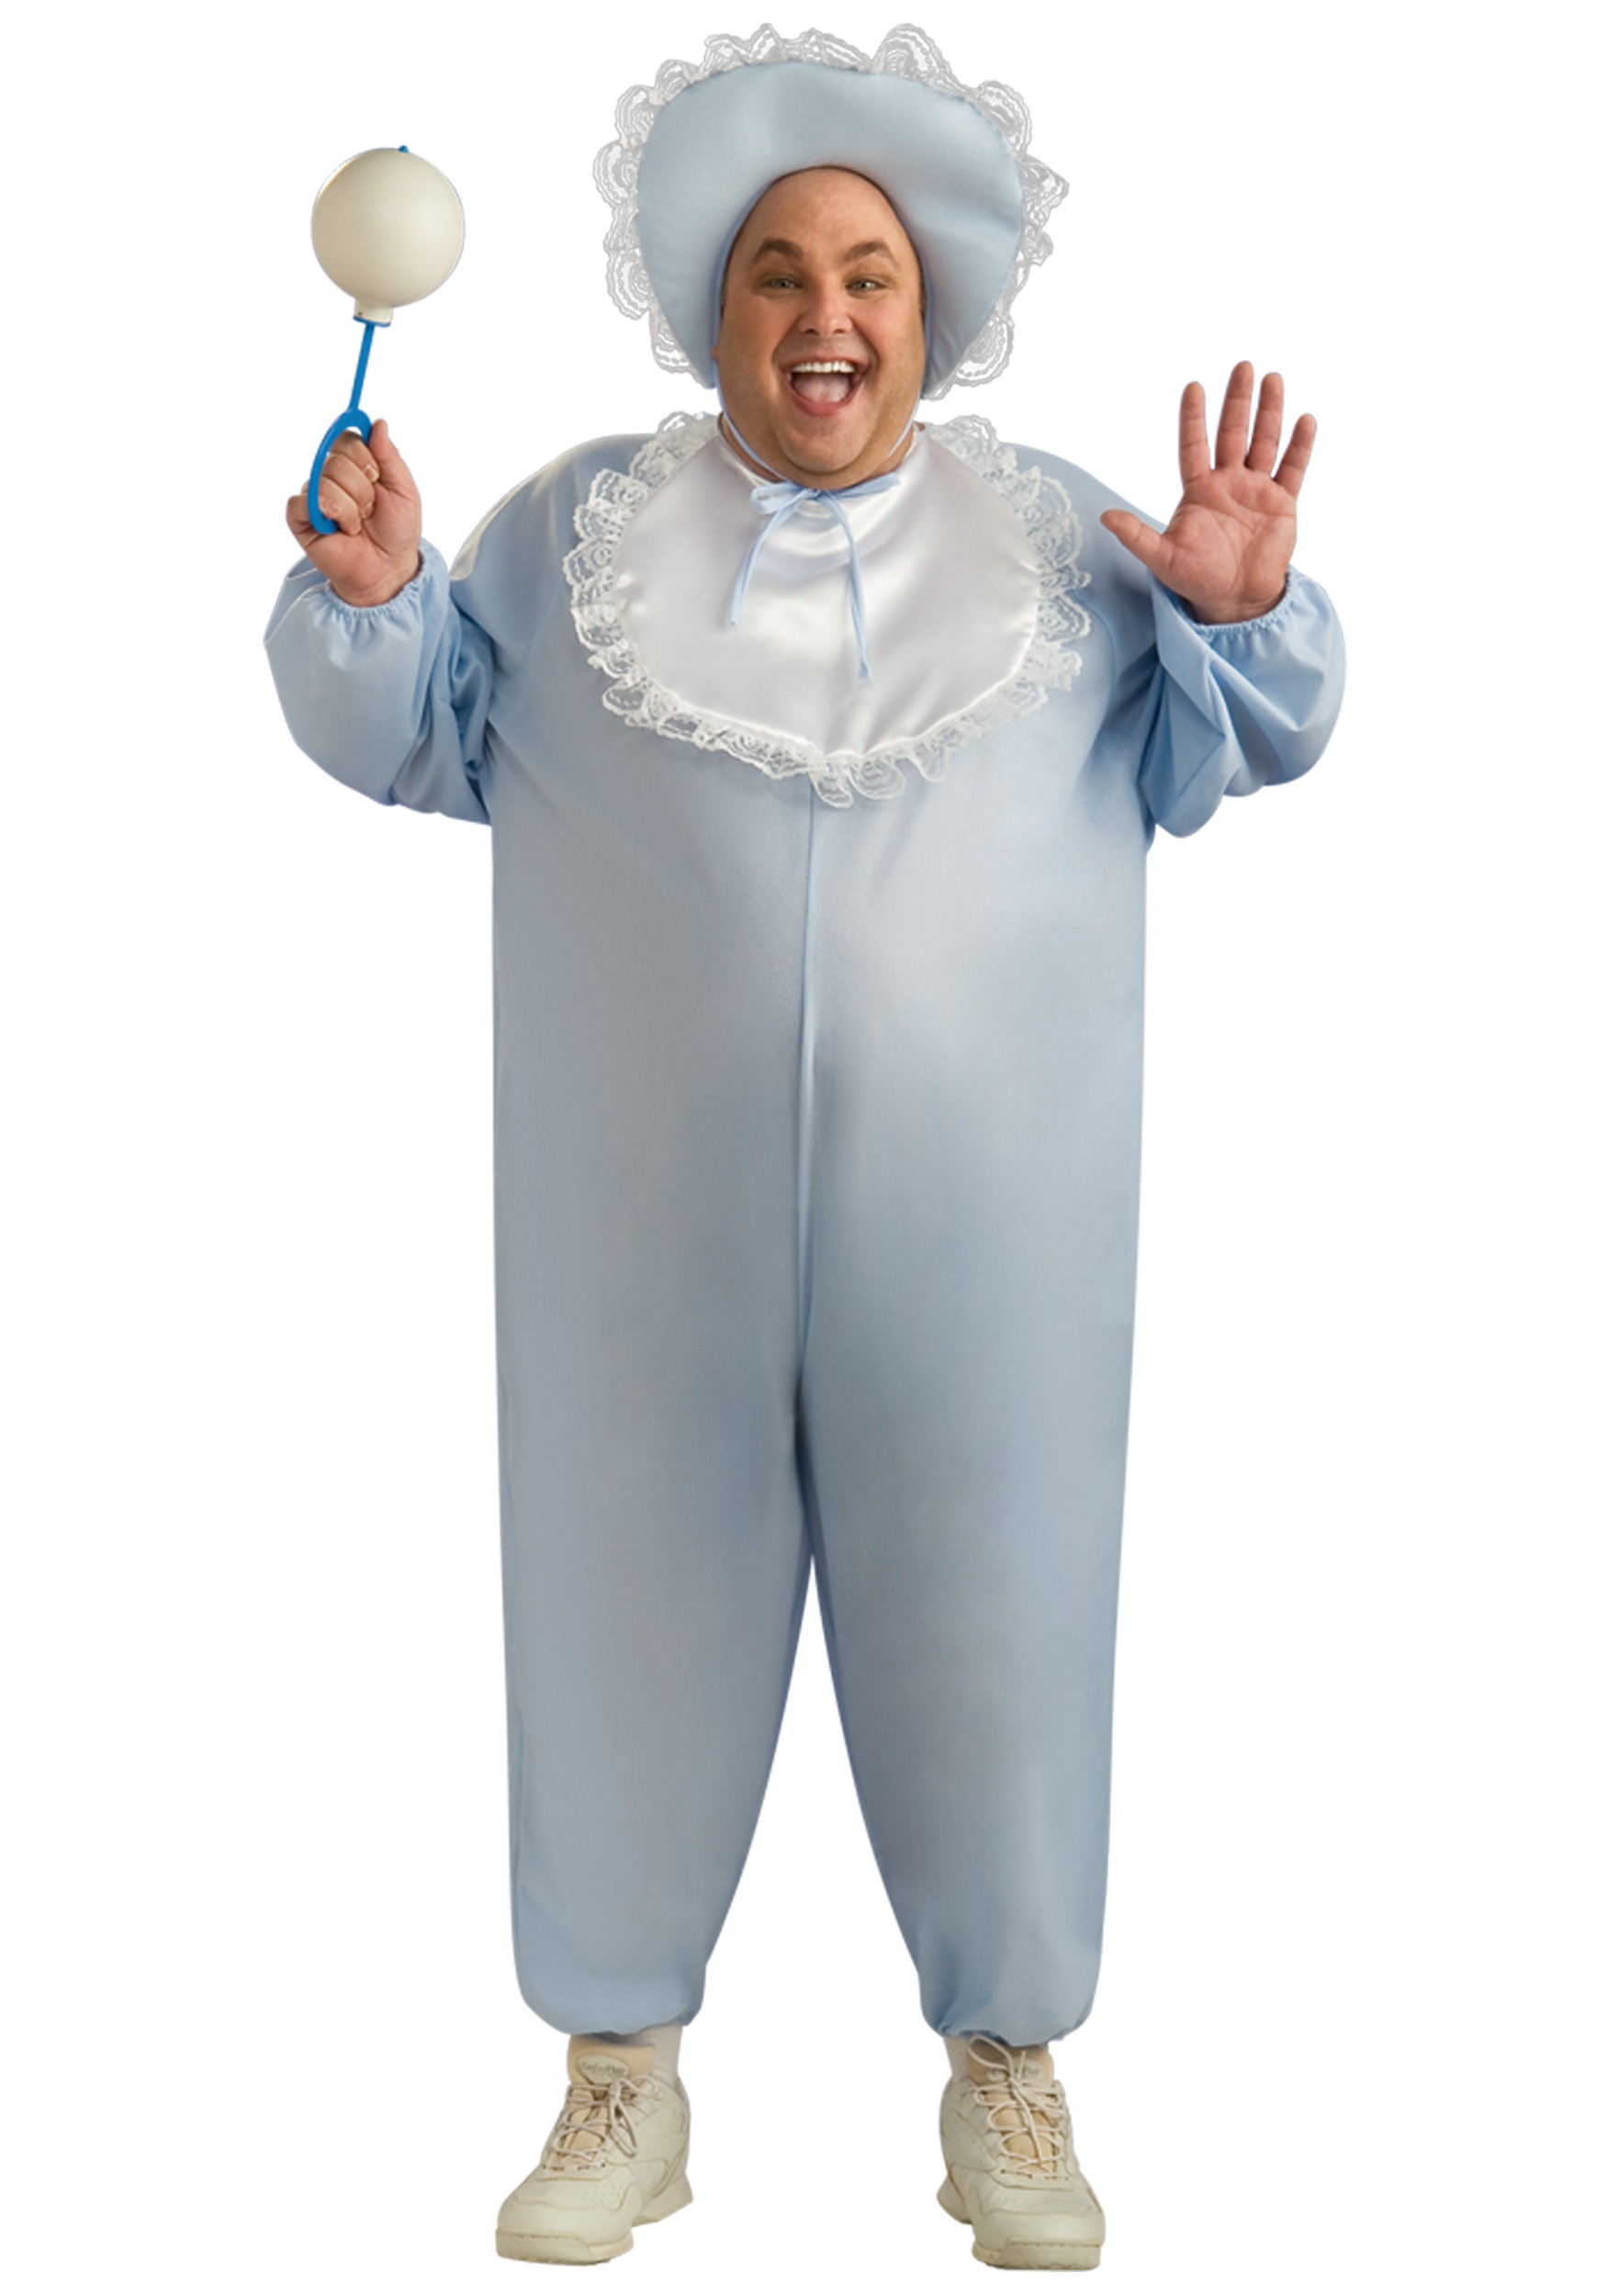 https://images.halloween.com/products/8699/1-1/adult-baby-boy-plus-size-costume.jpg